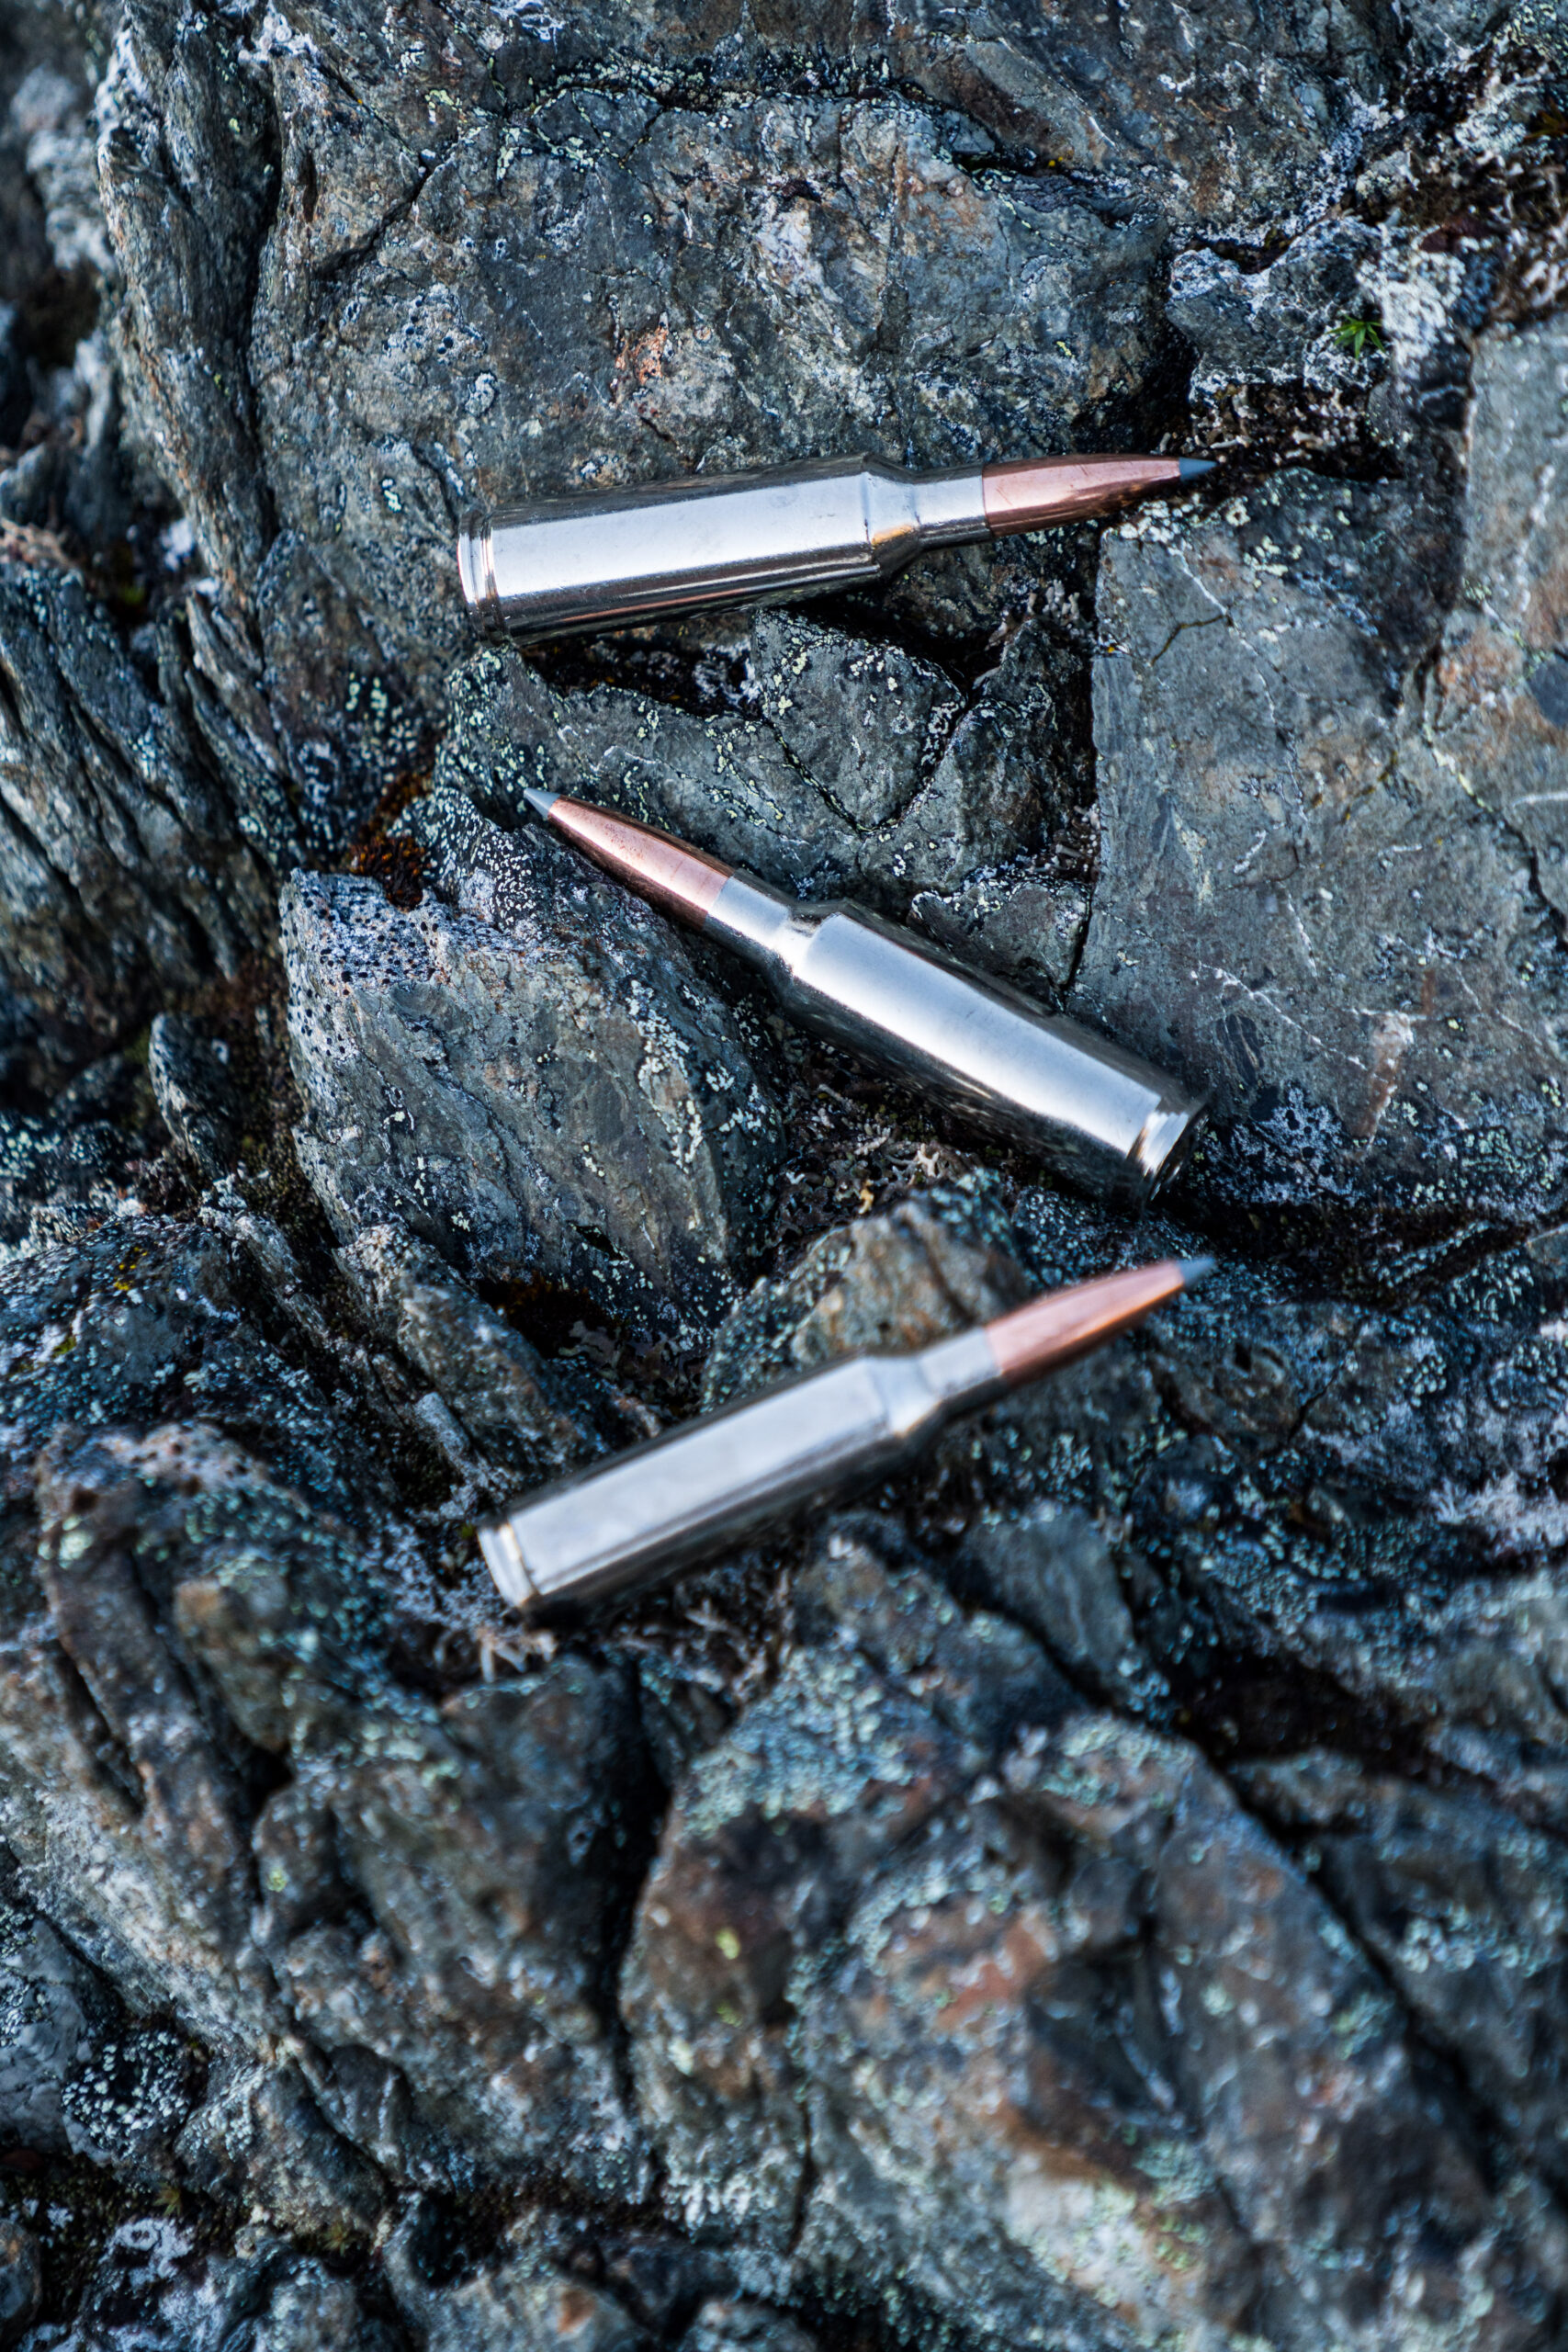 Three 6.8 Western cartridges for mountain goats.